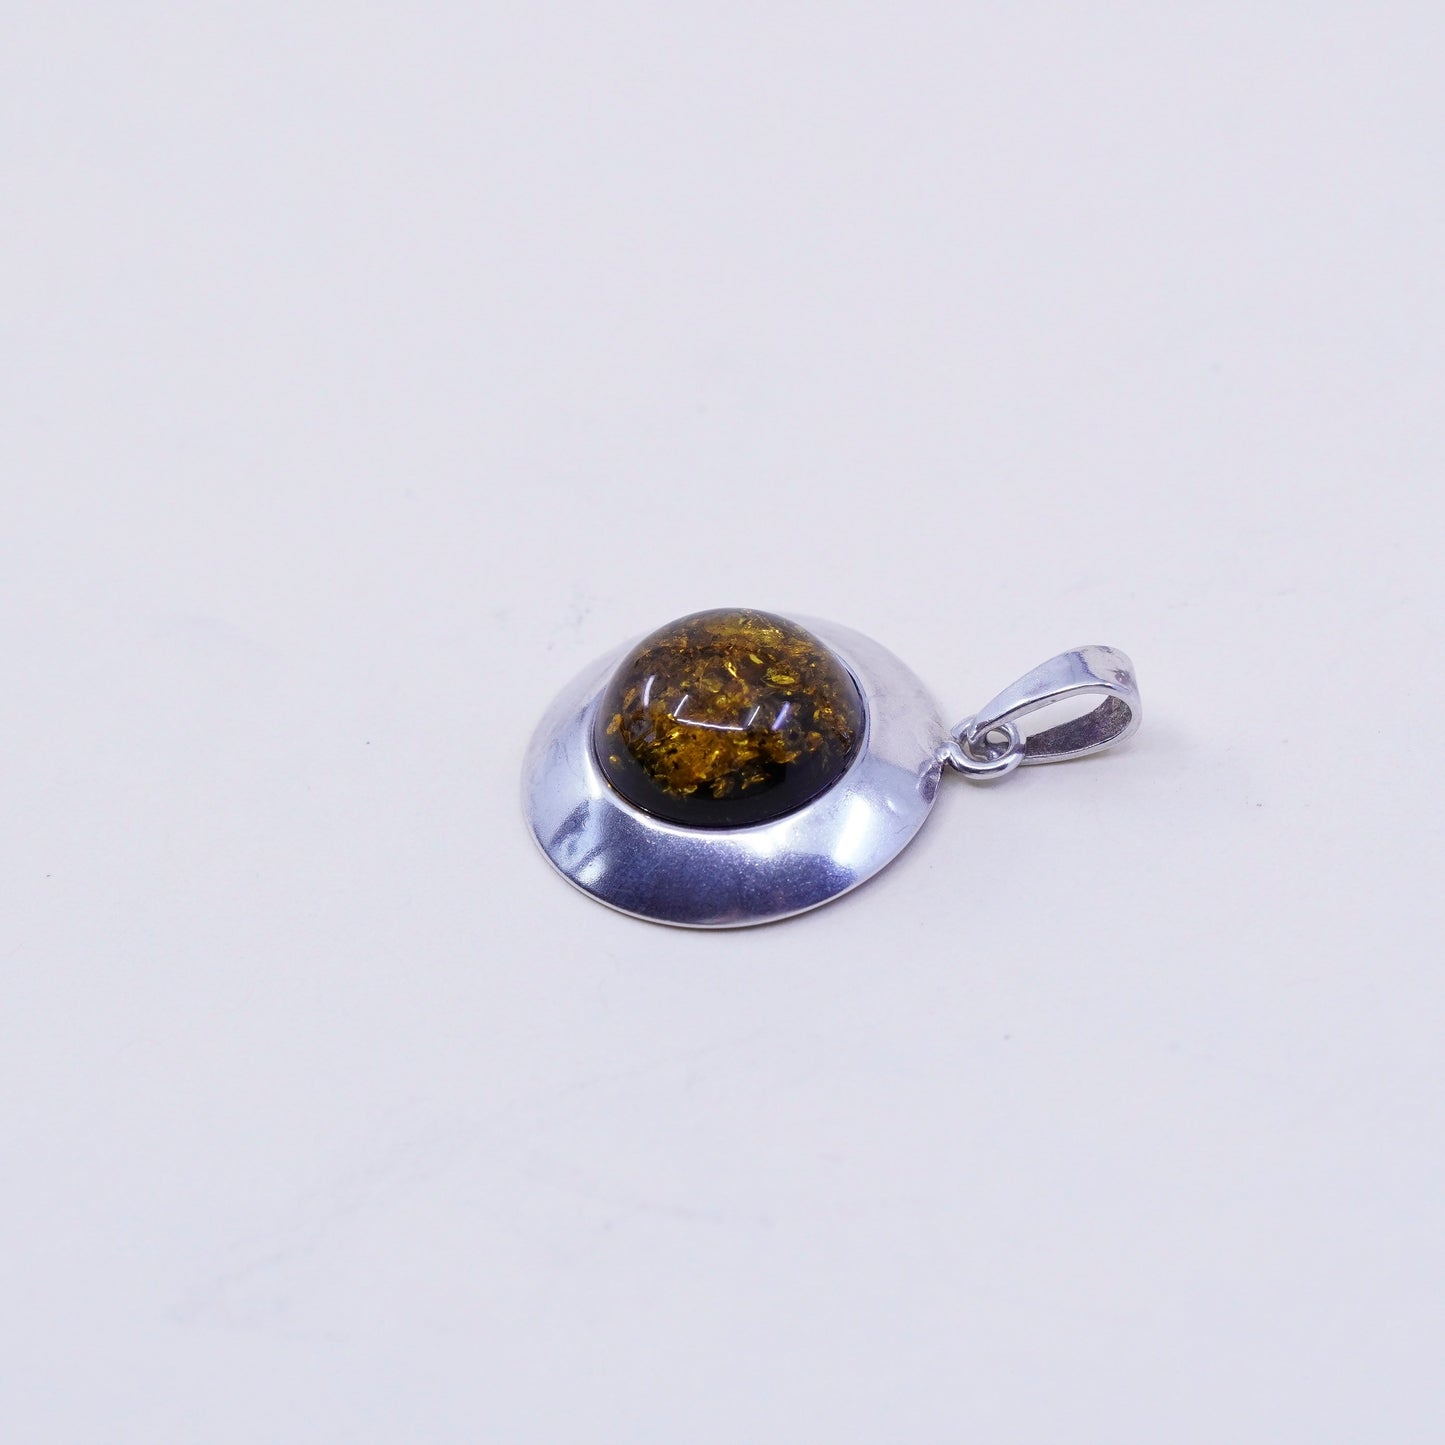 Vintage sterling 925 silver handmade pendant charm with amber